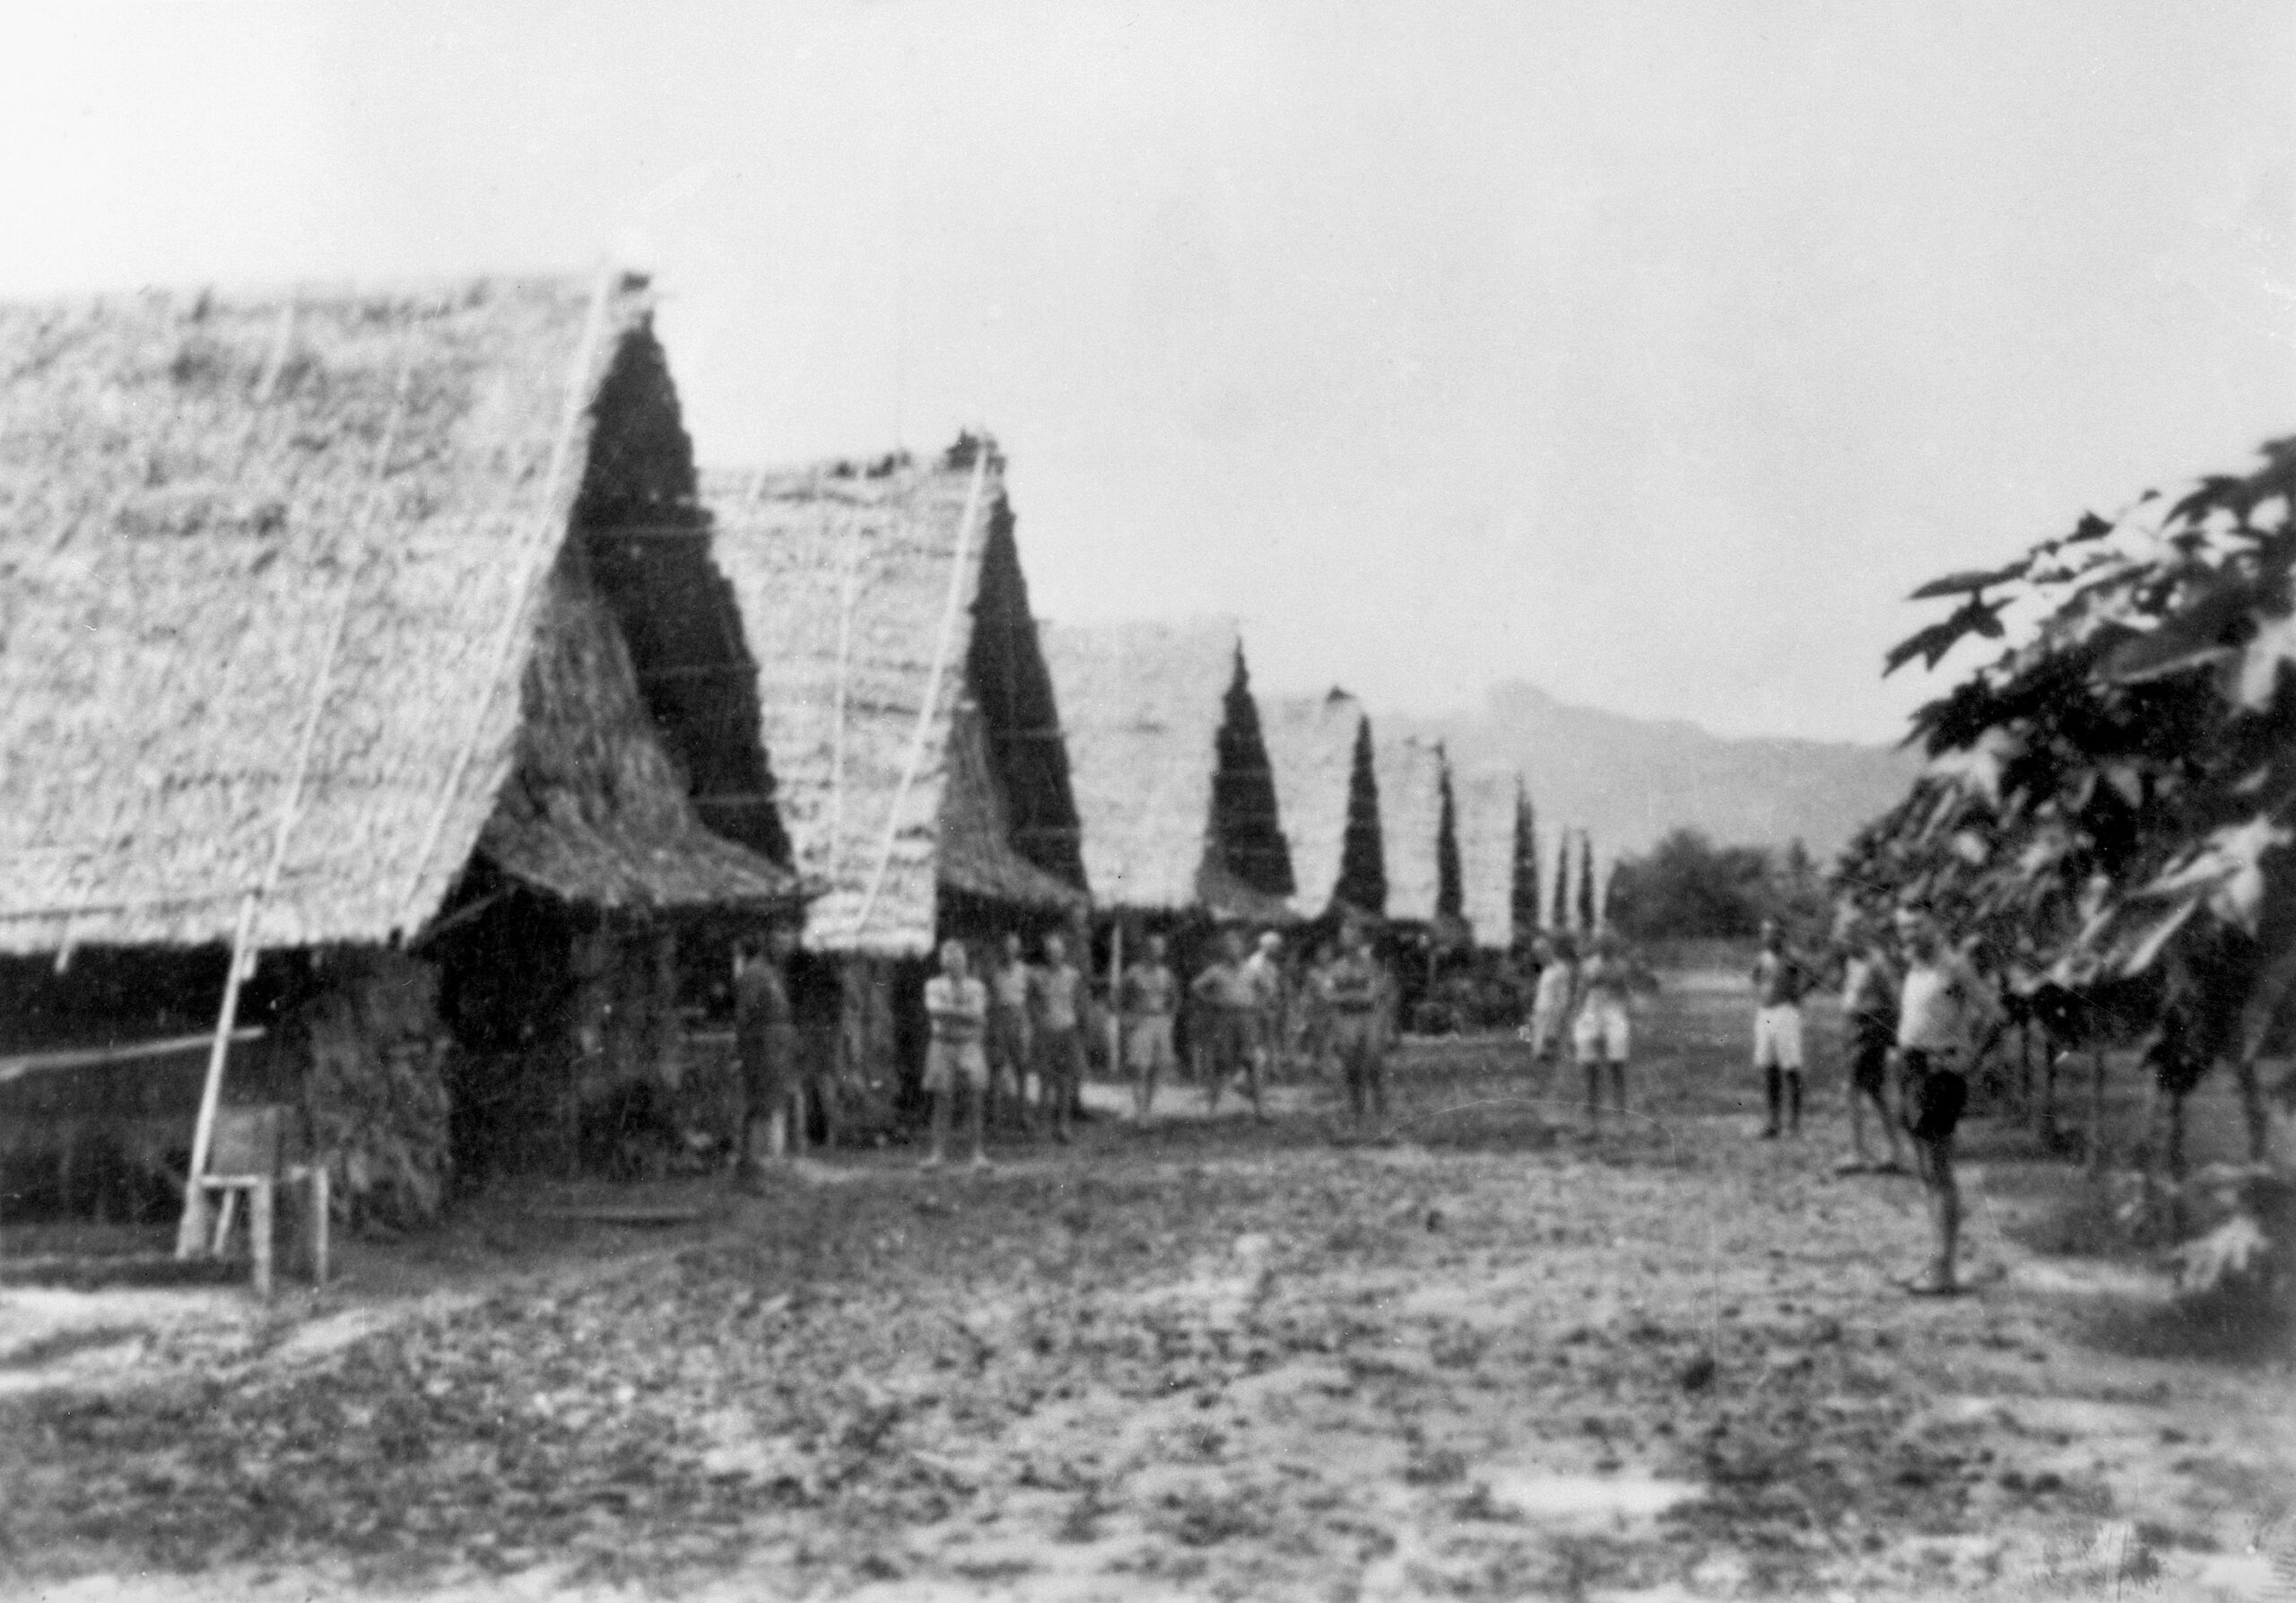 Allied prisoners stand outside their huts at the Nong Pladuk POW camp. Charlie Mott was sent to this location in September 1942. After the completion of the Burma-Thailand Railway, a number of prisoners were taken to Nong Pladuk. Others boarded Hell Ships for the arduous trek to Japan. The headquarters building of the Japanese camp commander can be seen in the background.